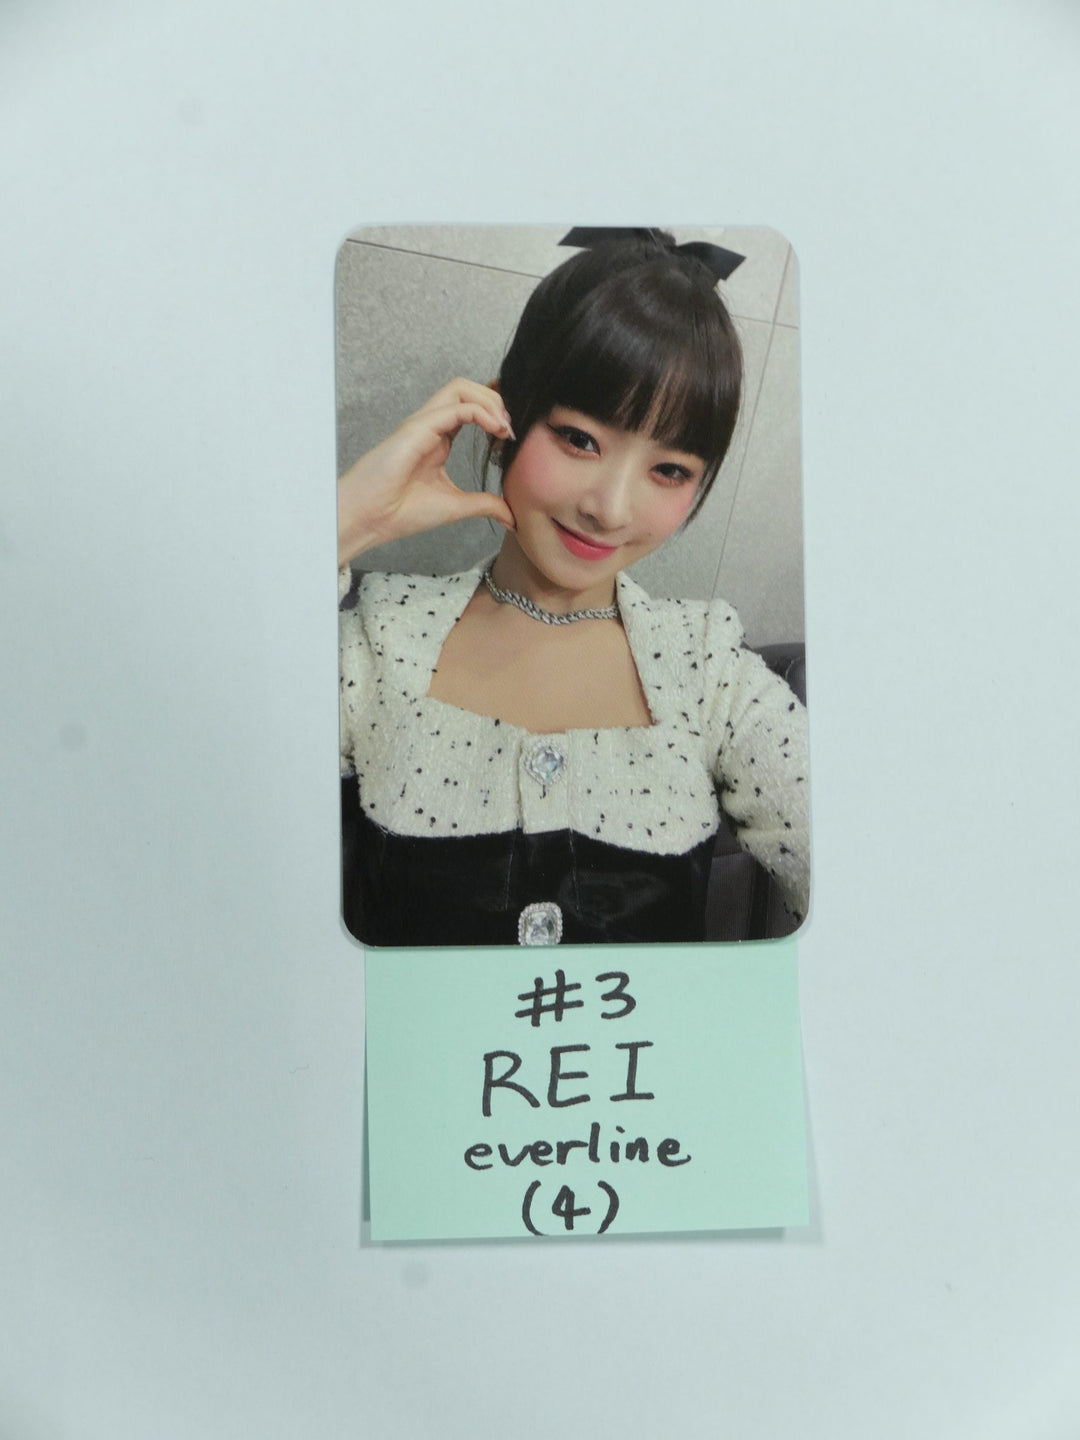 IVE 'ELEVEN' 1st Single - Everline Fansign Event Photocard Round 2